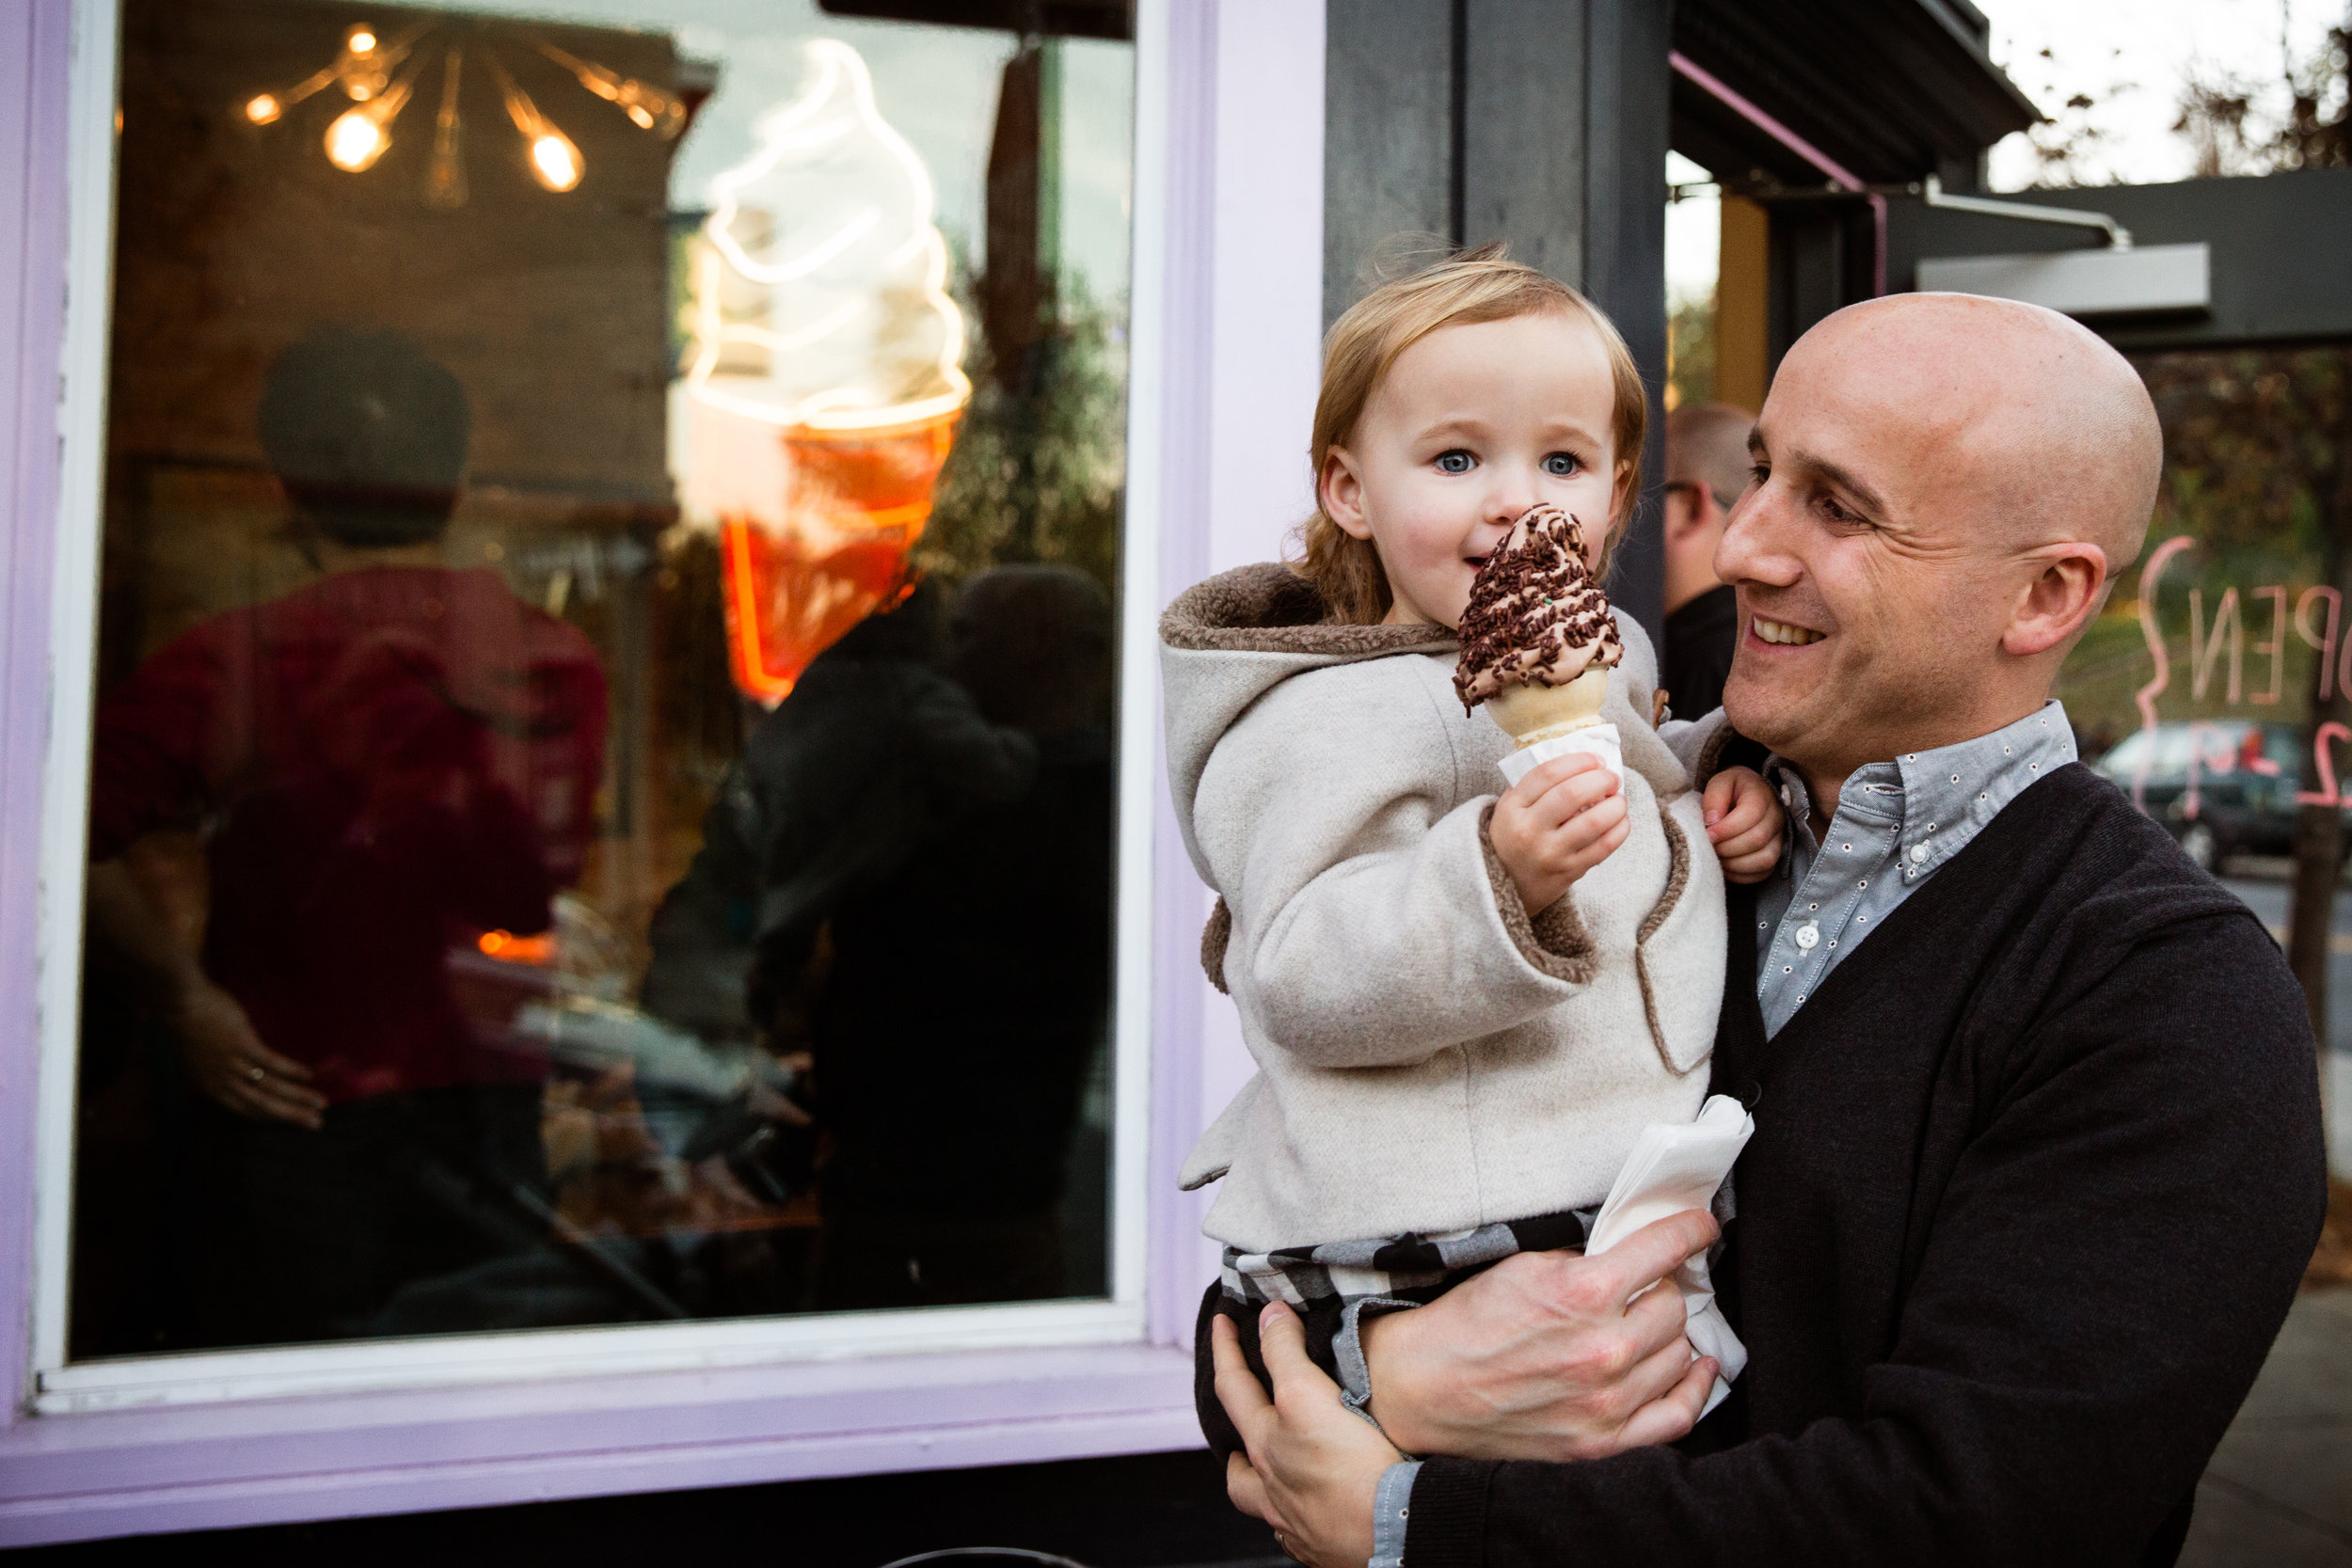 little girl in her father's arms proudly holds up ice cream cone she is eating